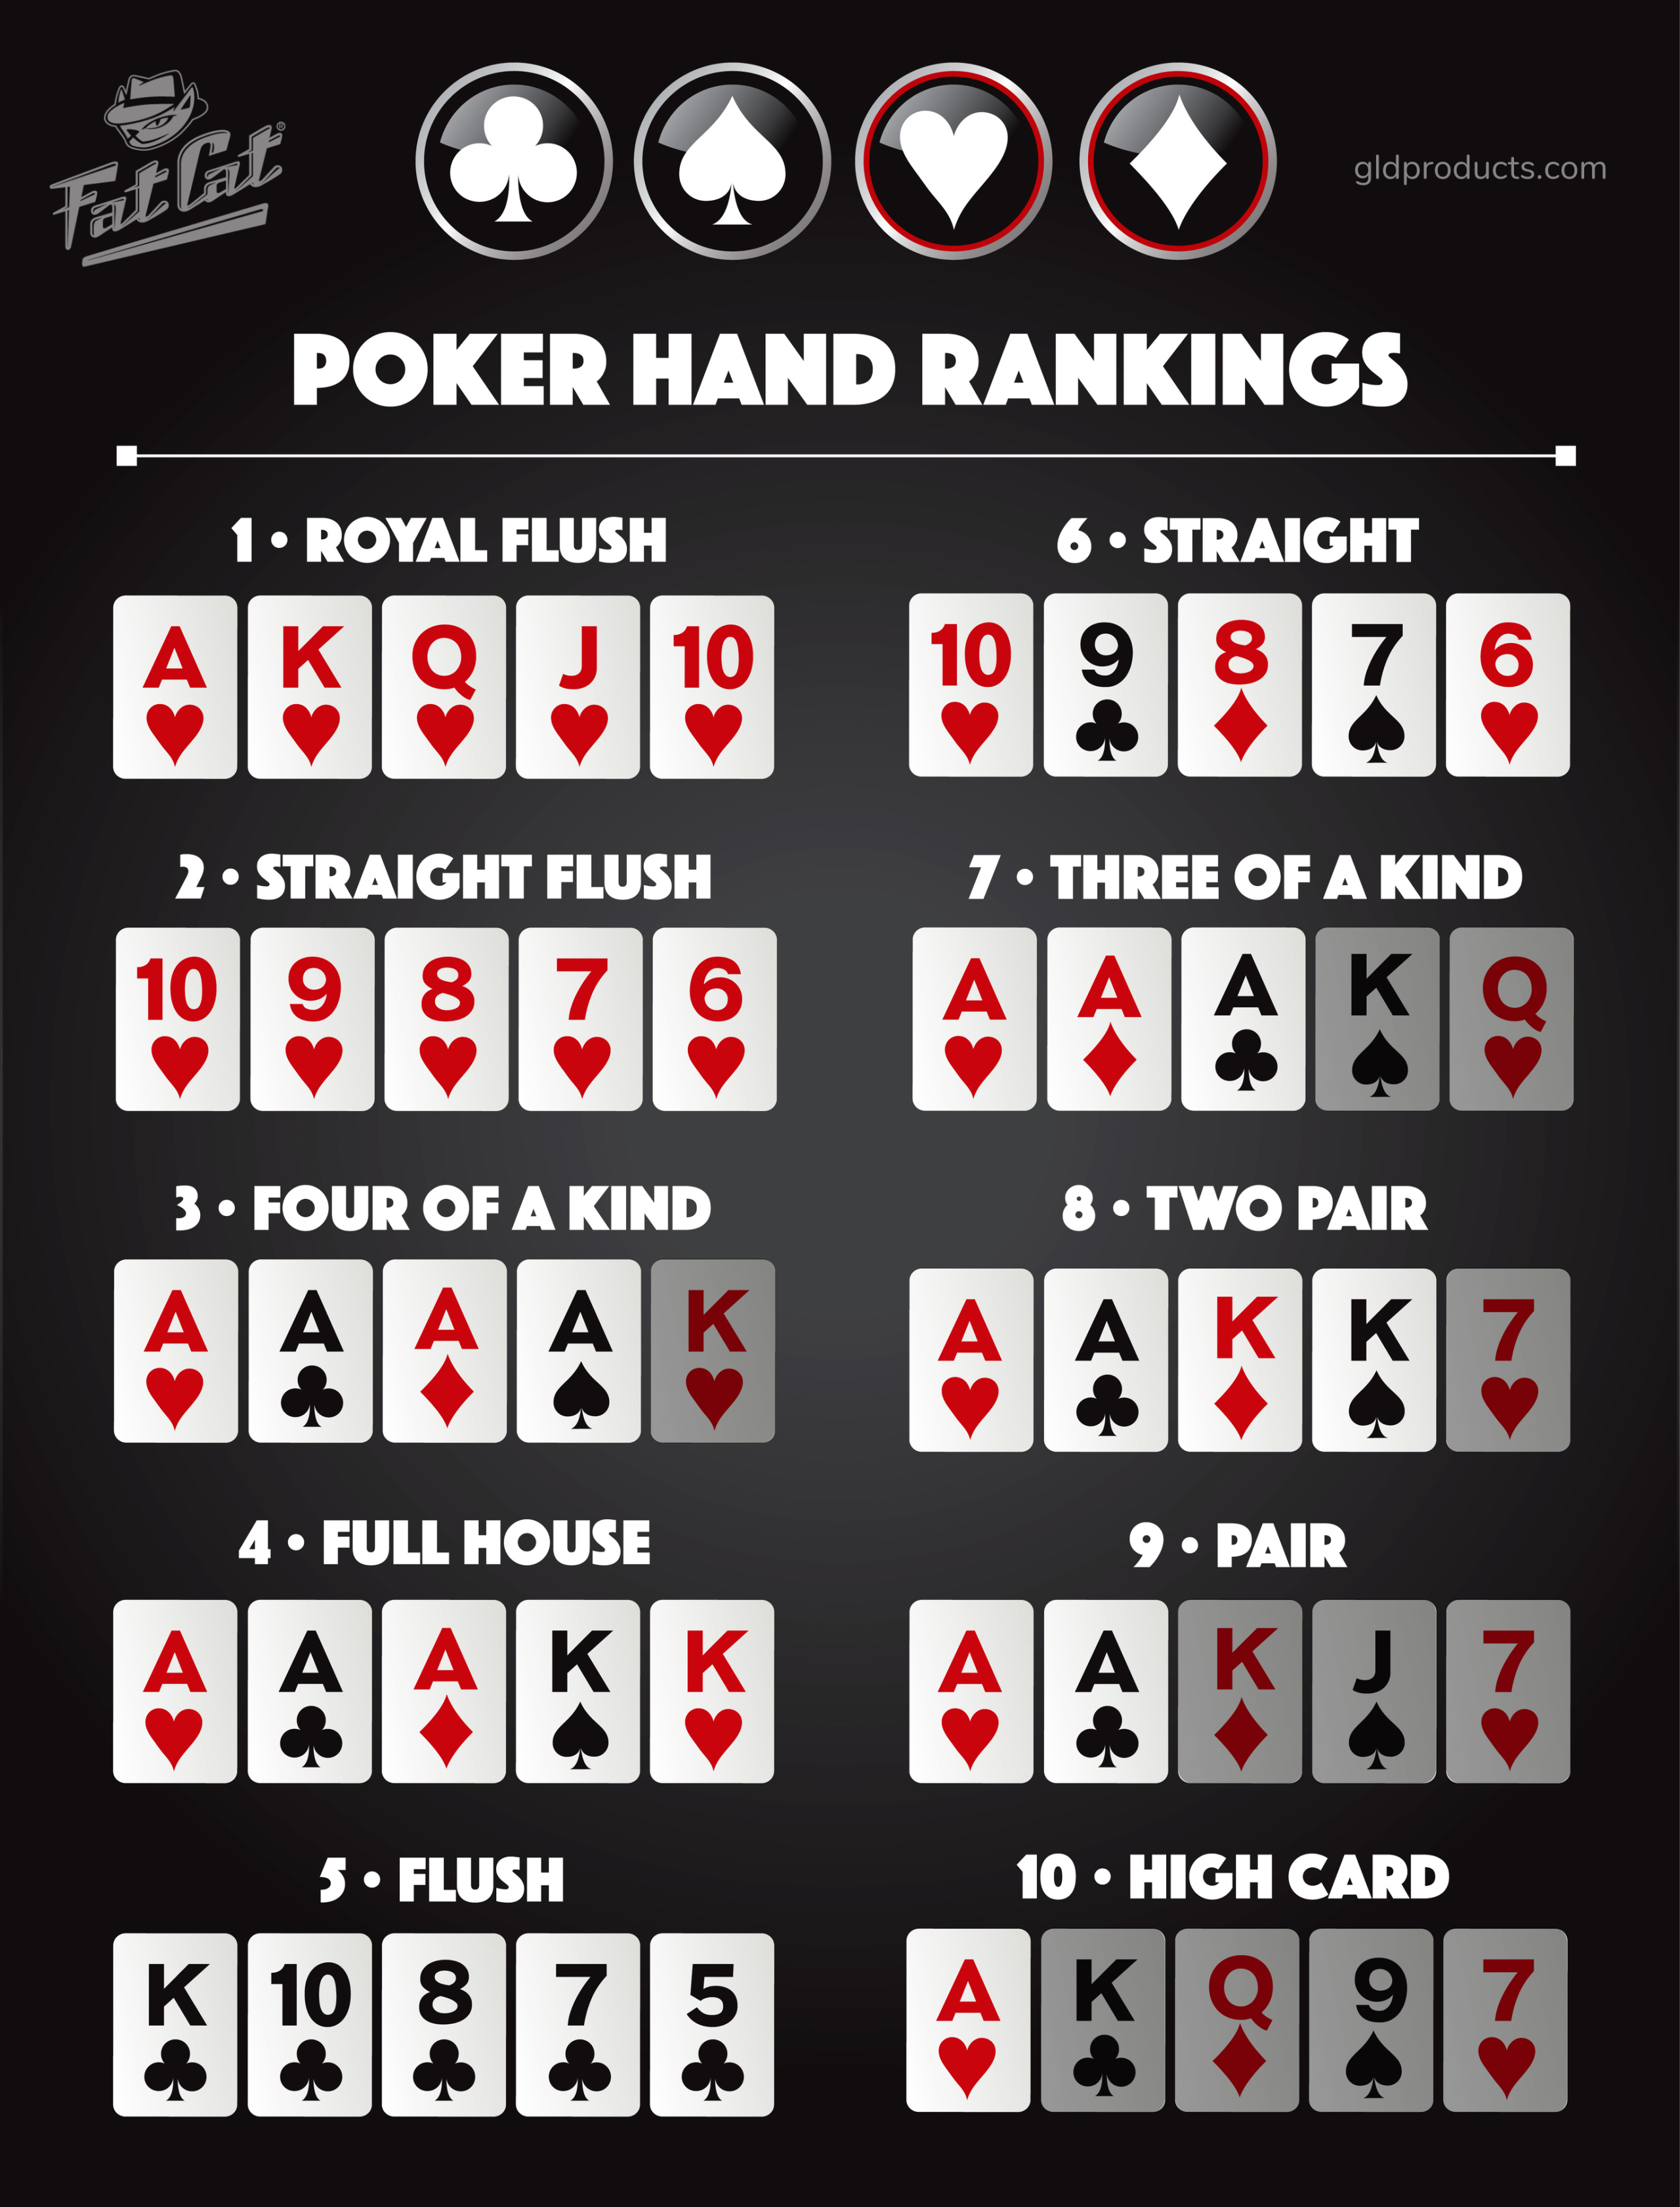 How is a Four of a Kind ranked in different poker variants?